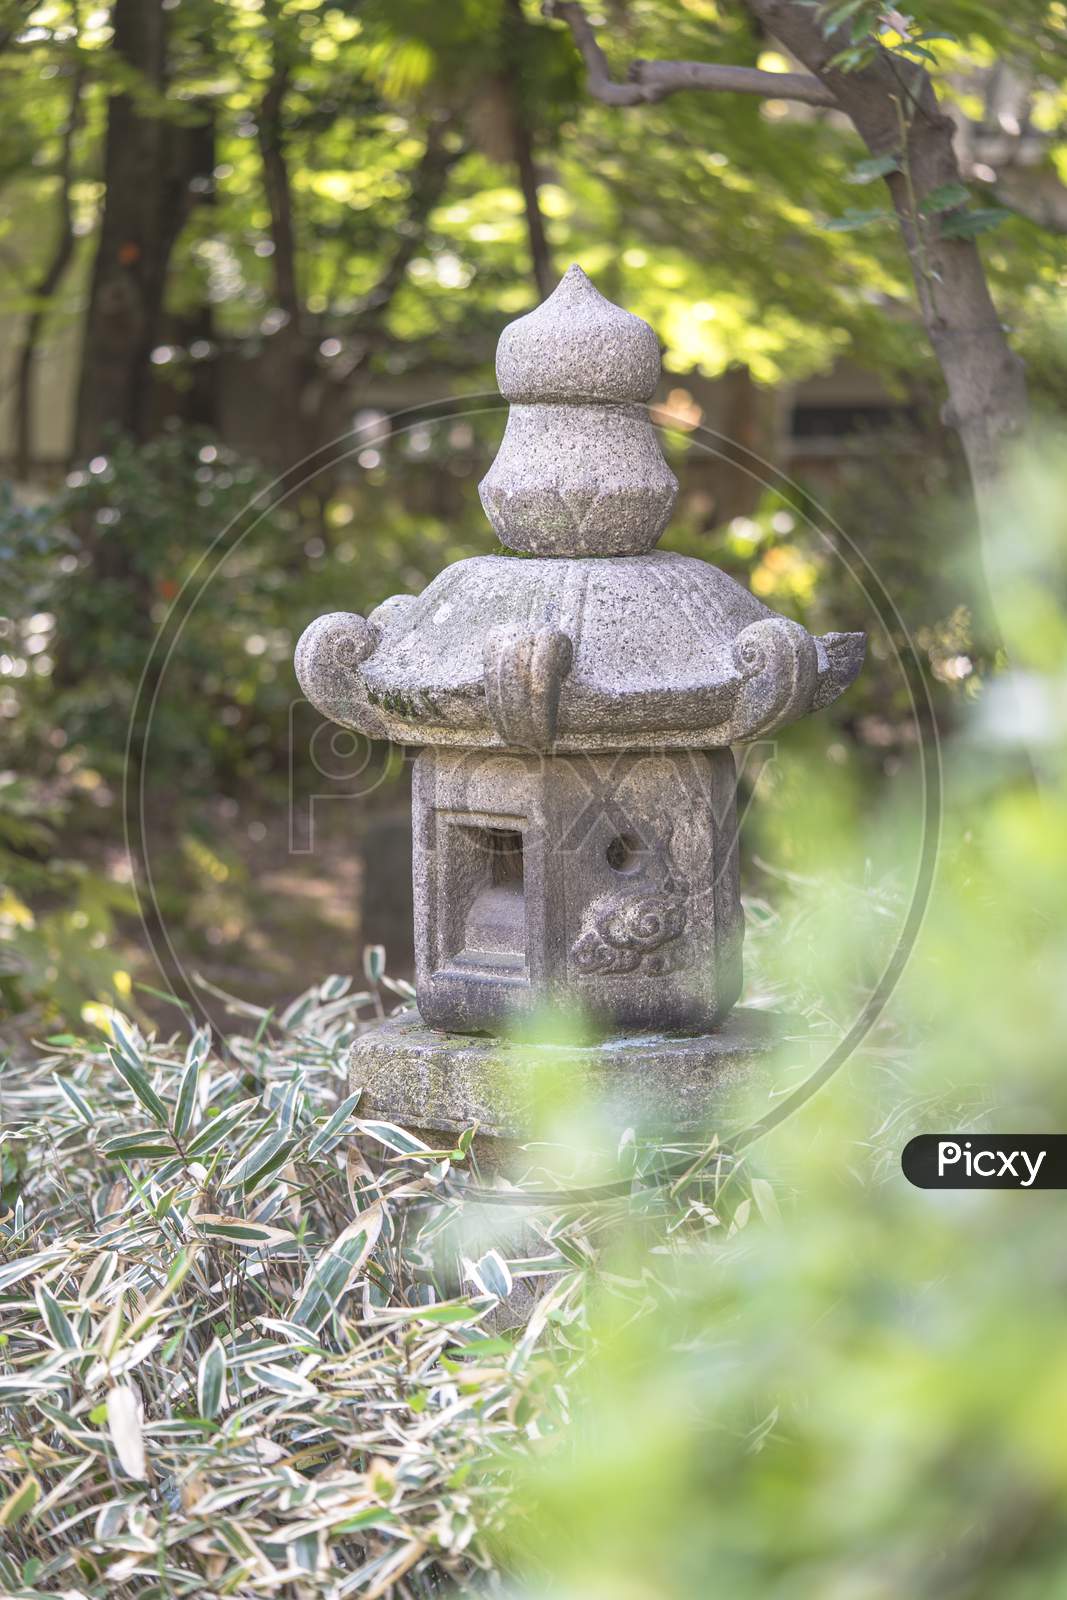 Stone Lantern In The Garden Of Shibusawa Museum Of Asukayama Park In The Kita District Of Tokyo, Japan.It Is Part Of One Of The Three Museums In Asukayama Park And Was Build In 1925.